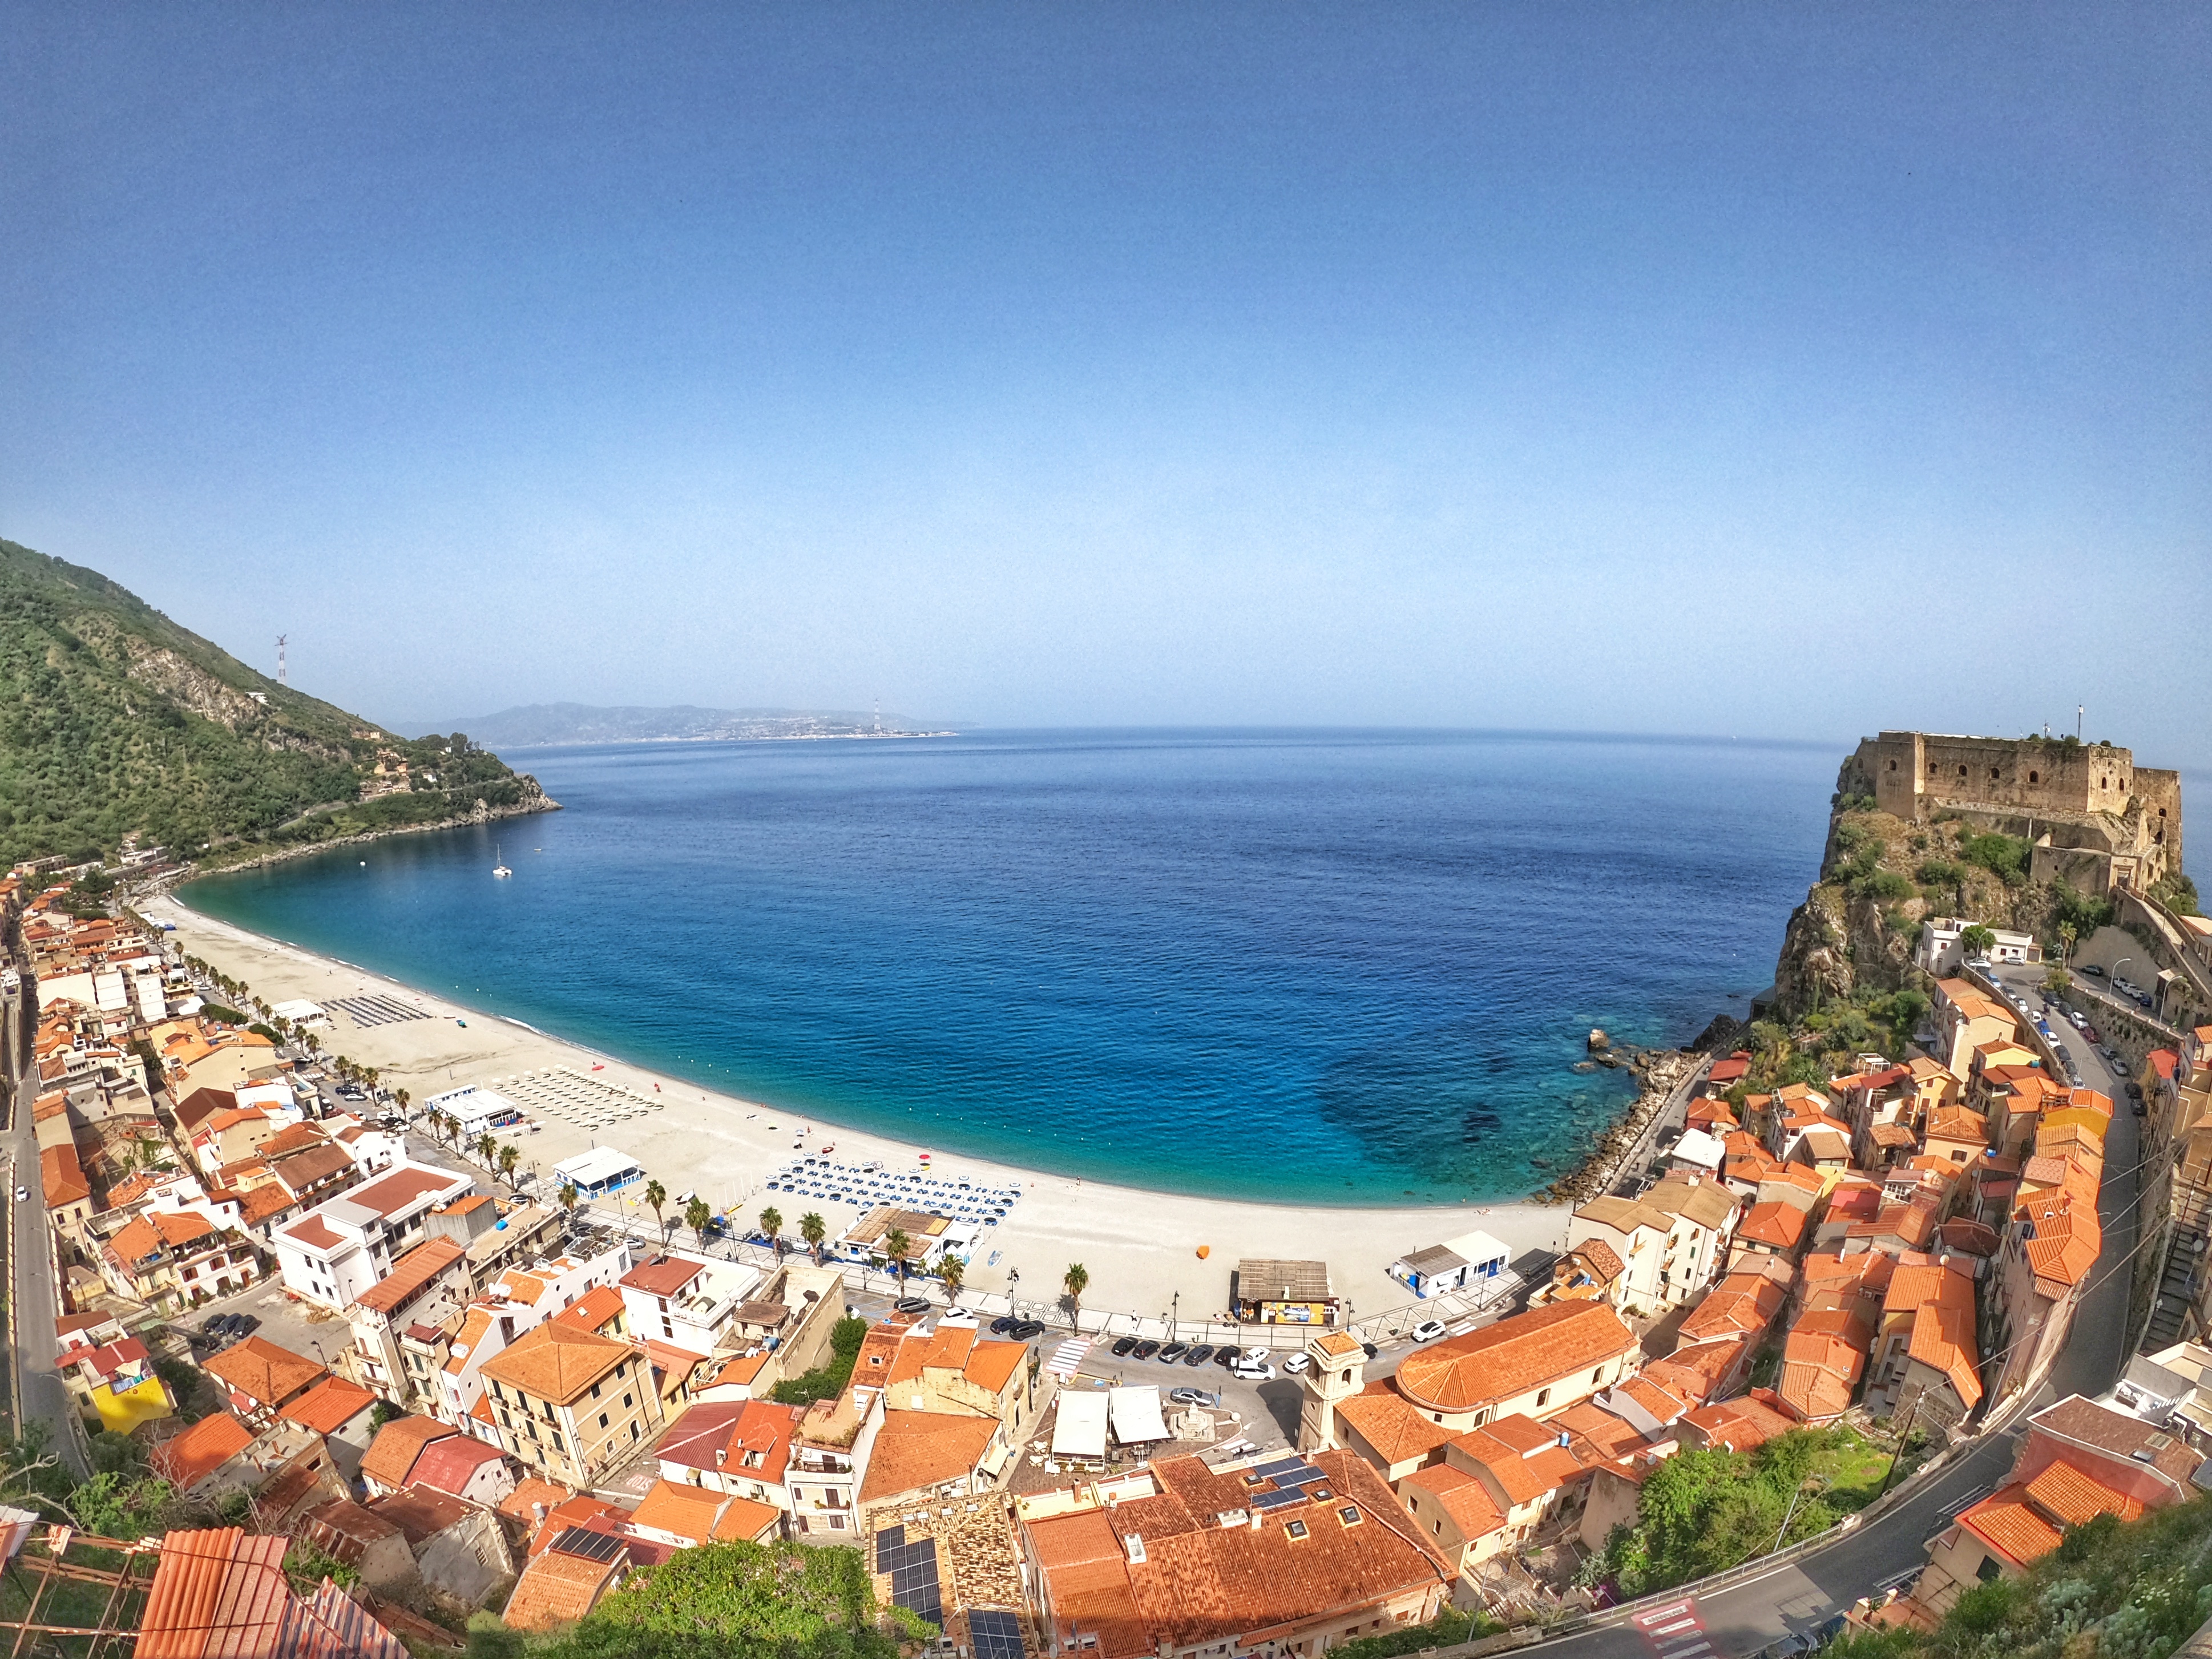 The view of the Strait from Scilla